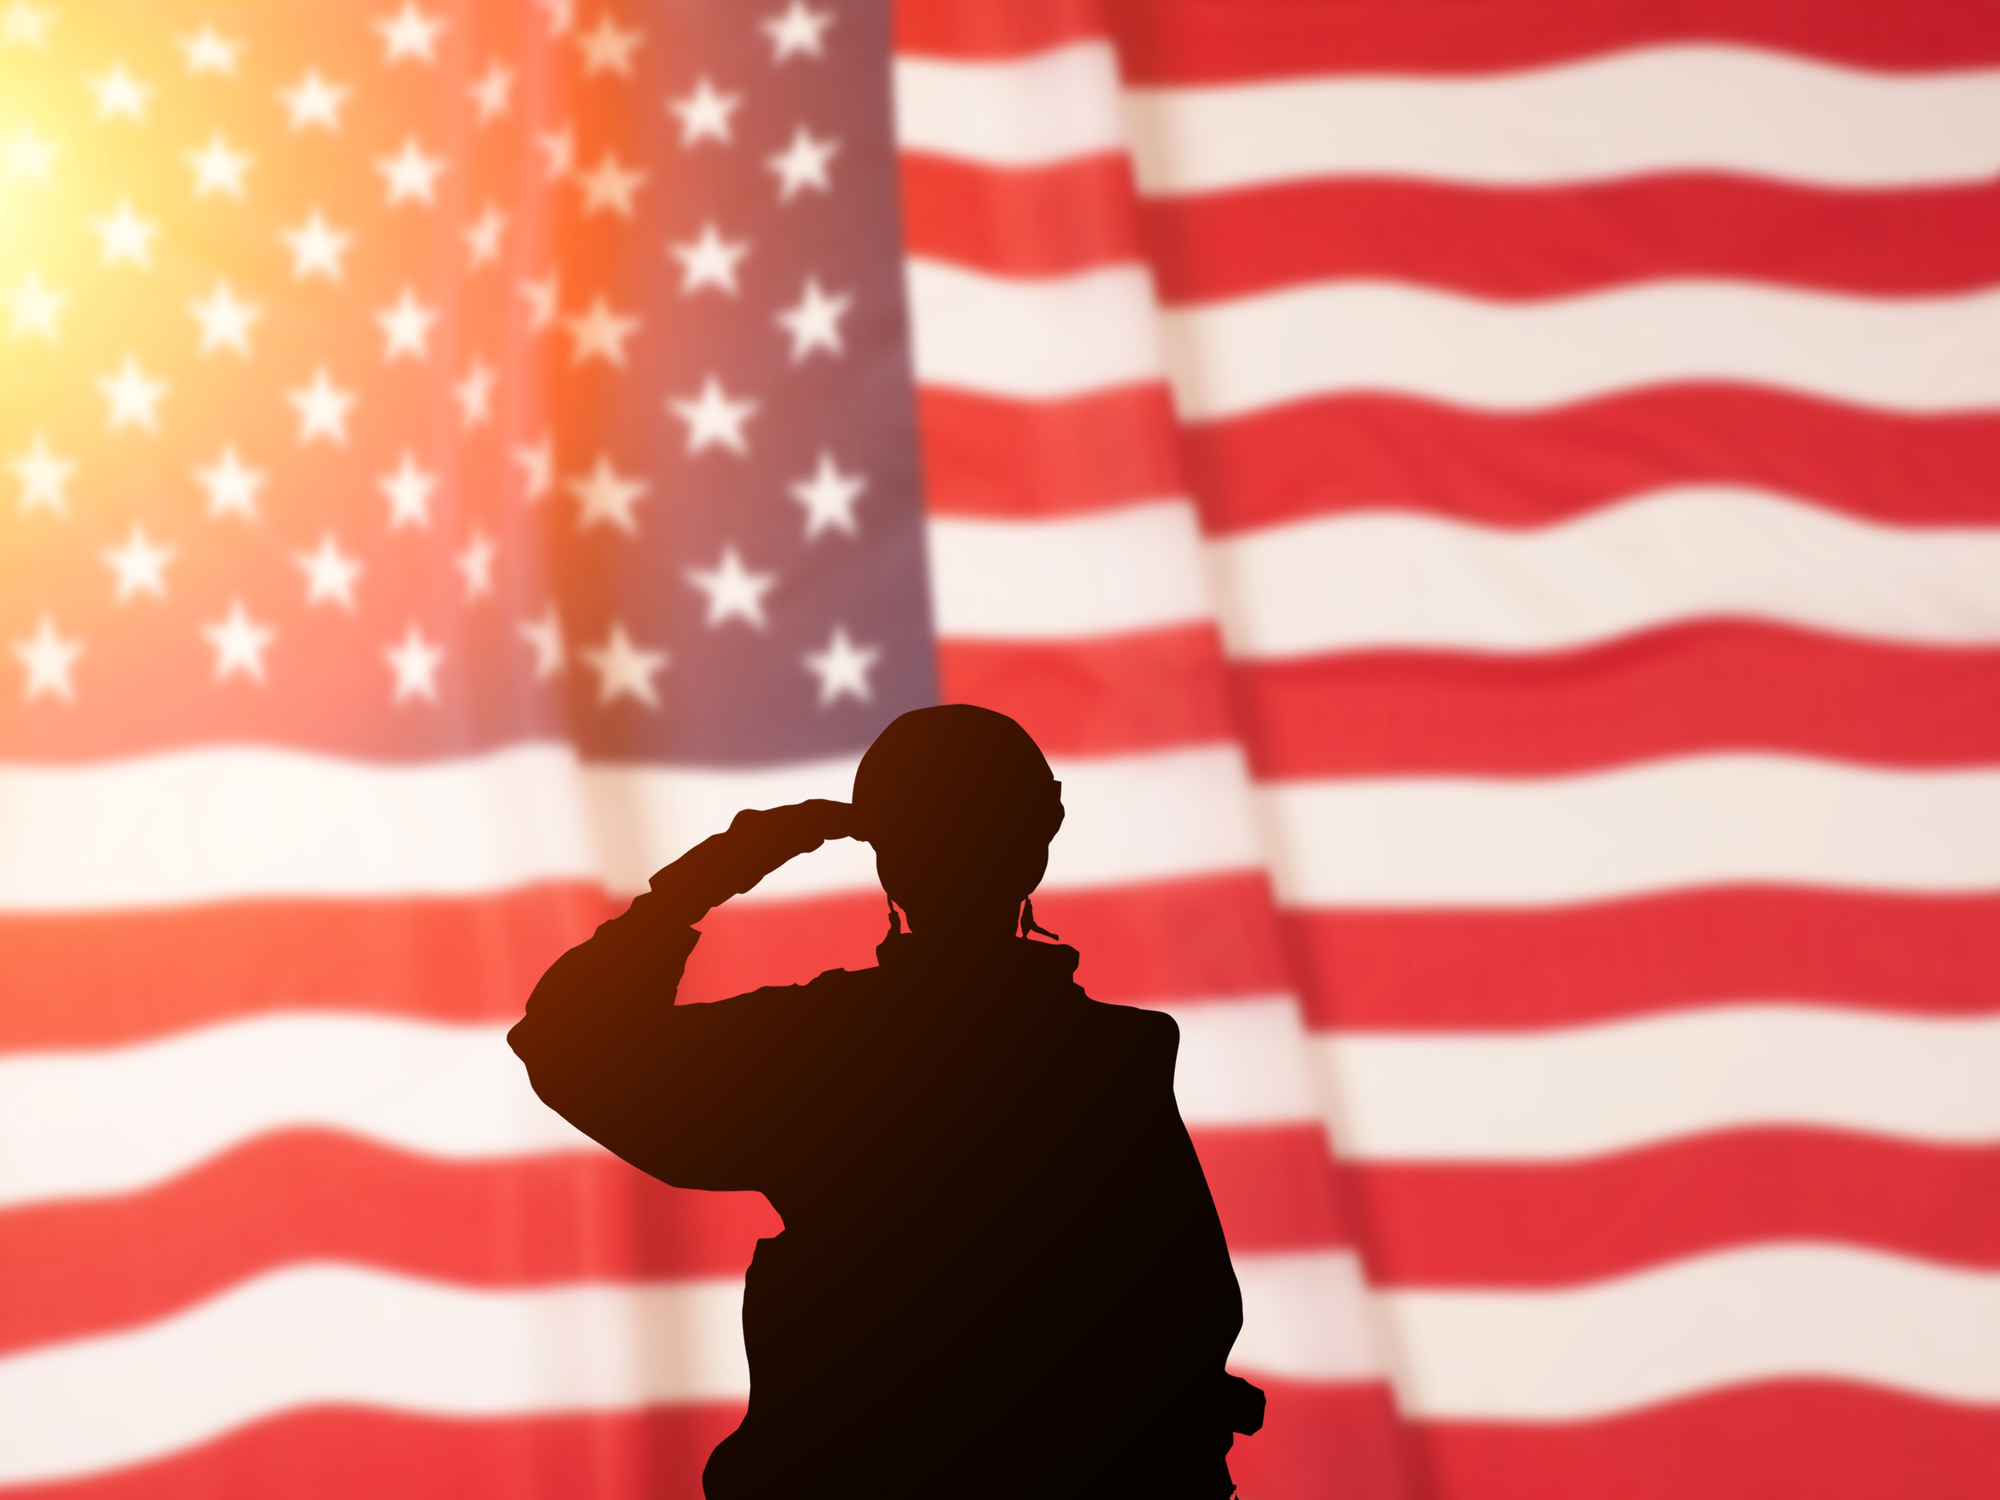 American flag with silhouette of a person saluting